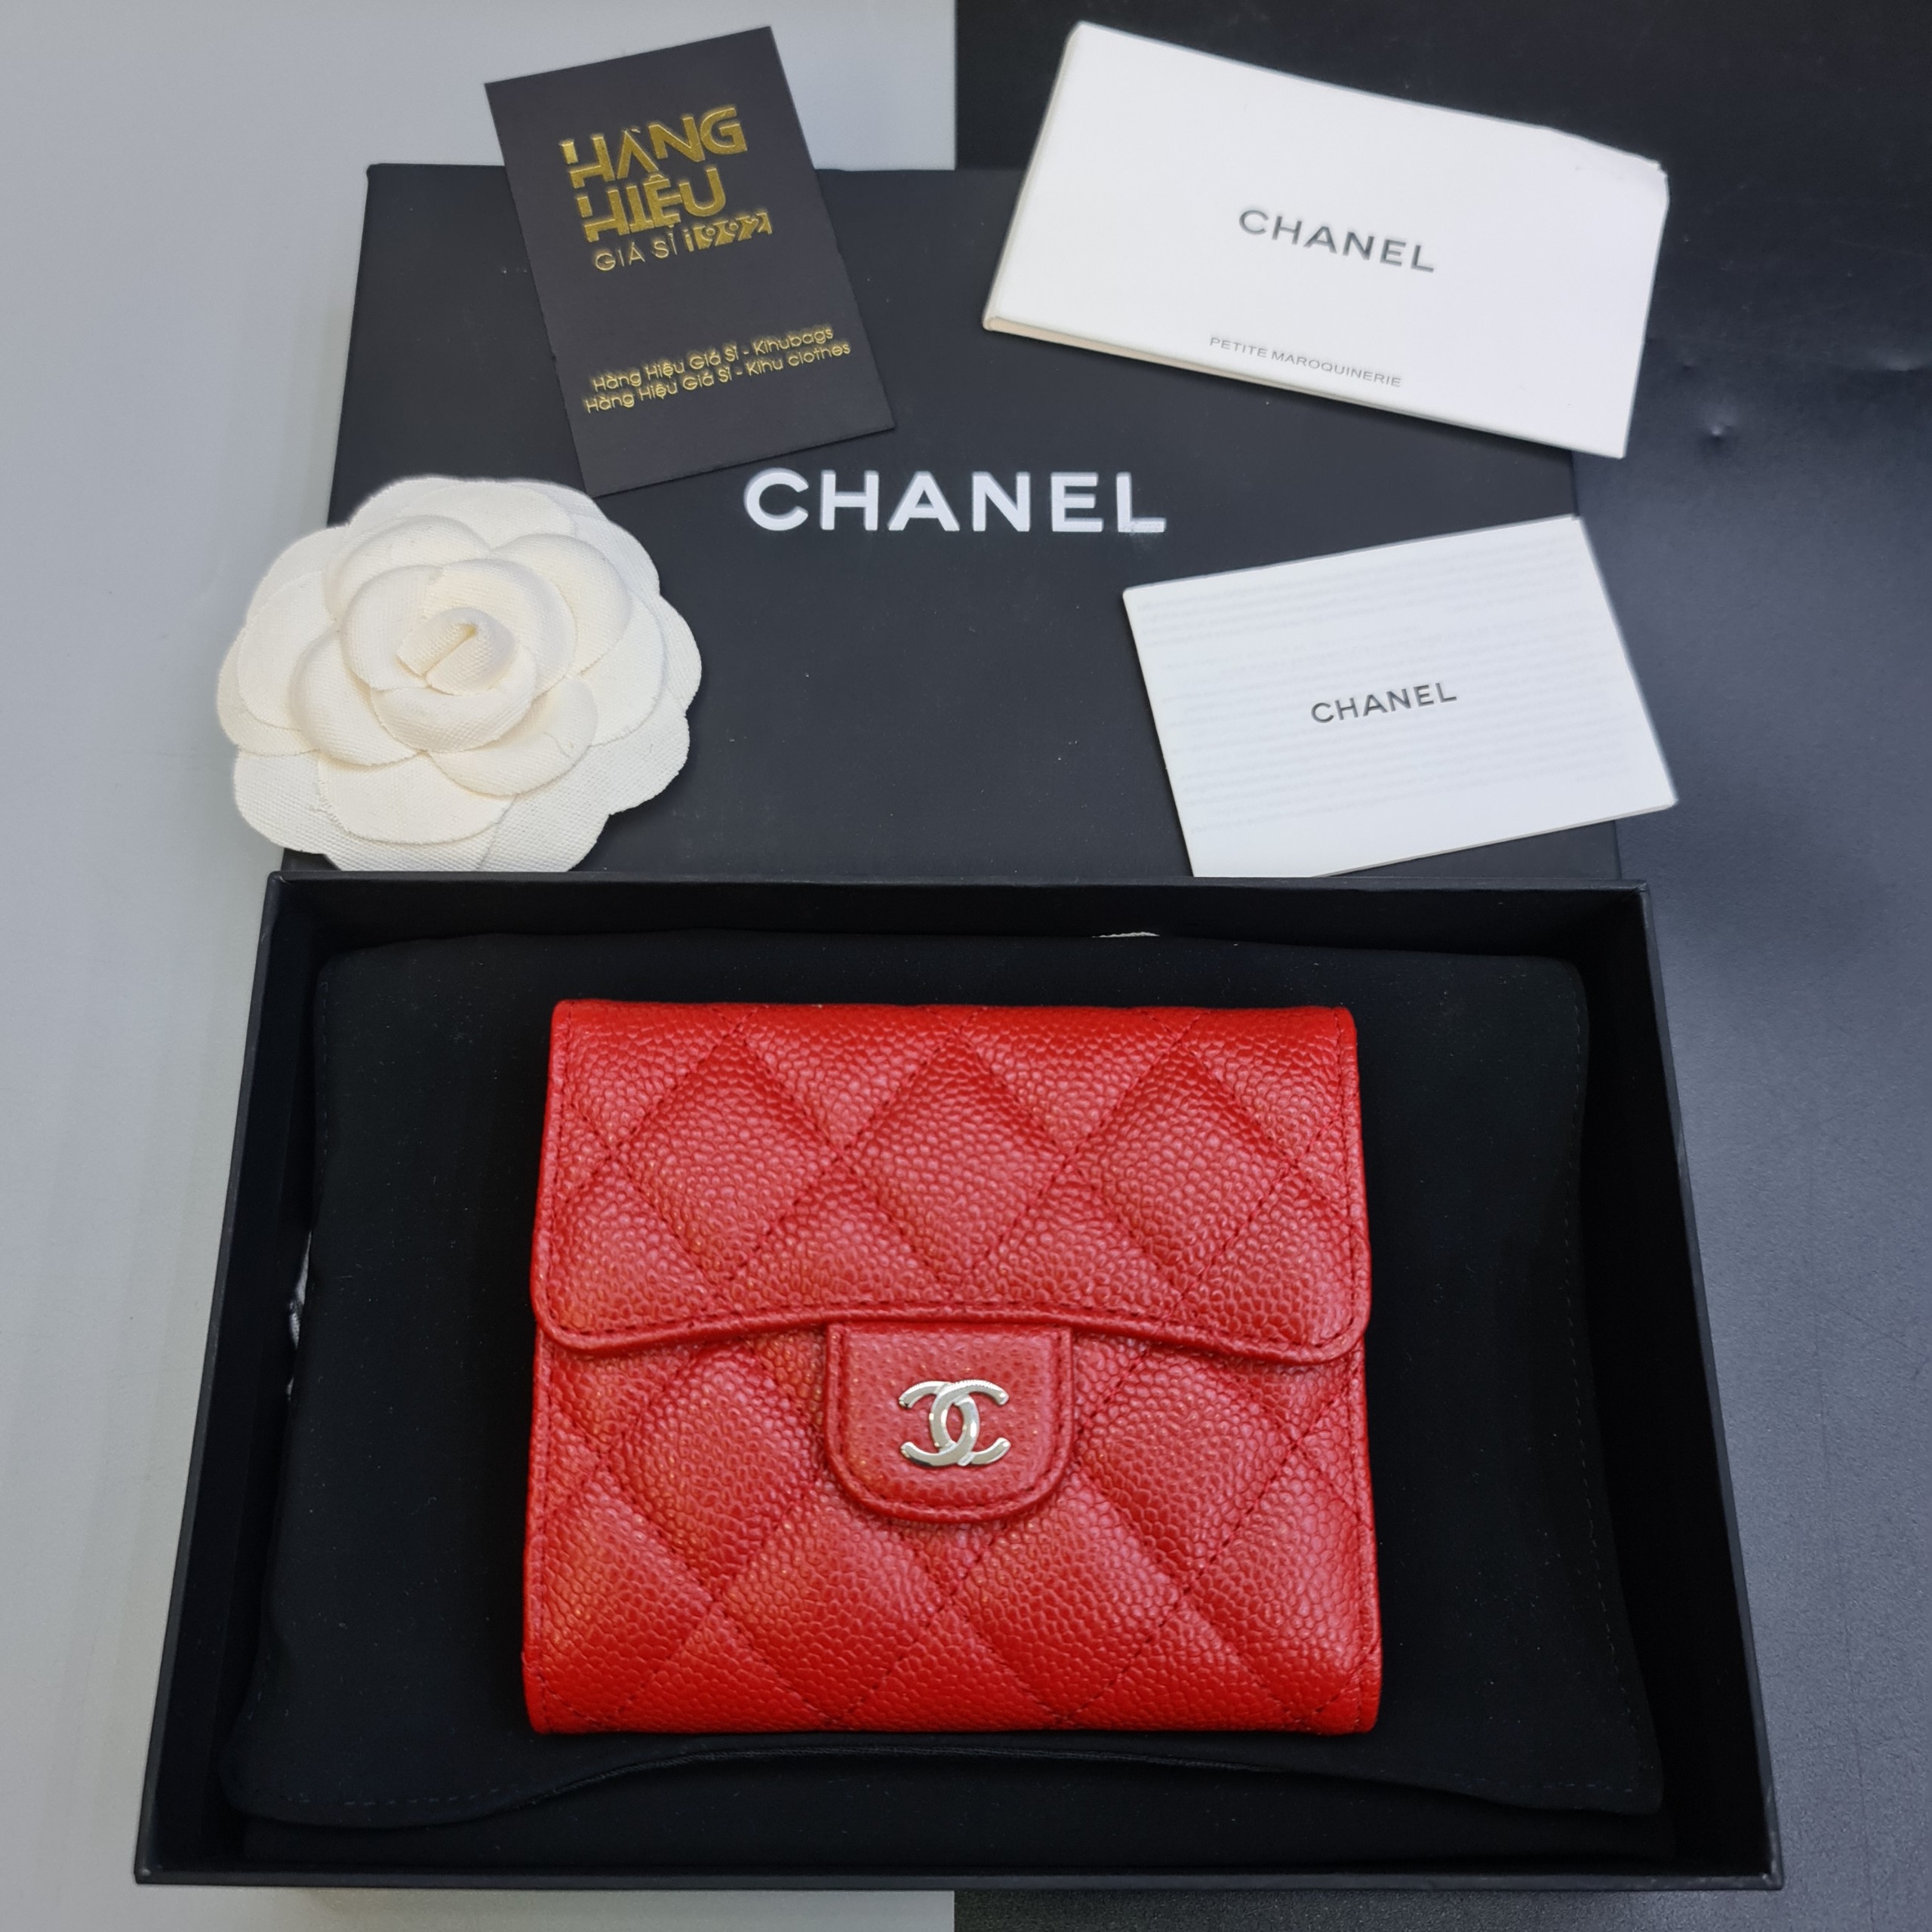 Chanel Card Holders in black  red color Chanel LV  YouTube